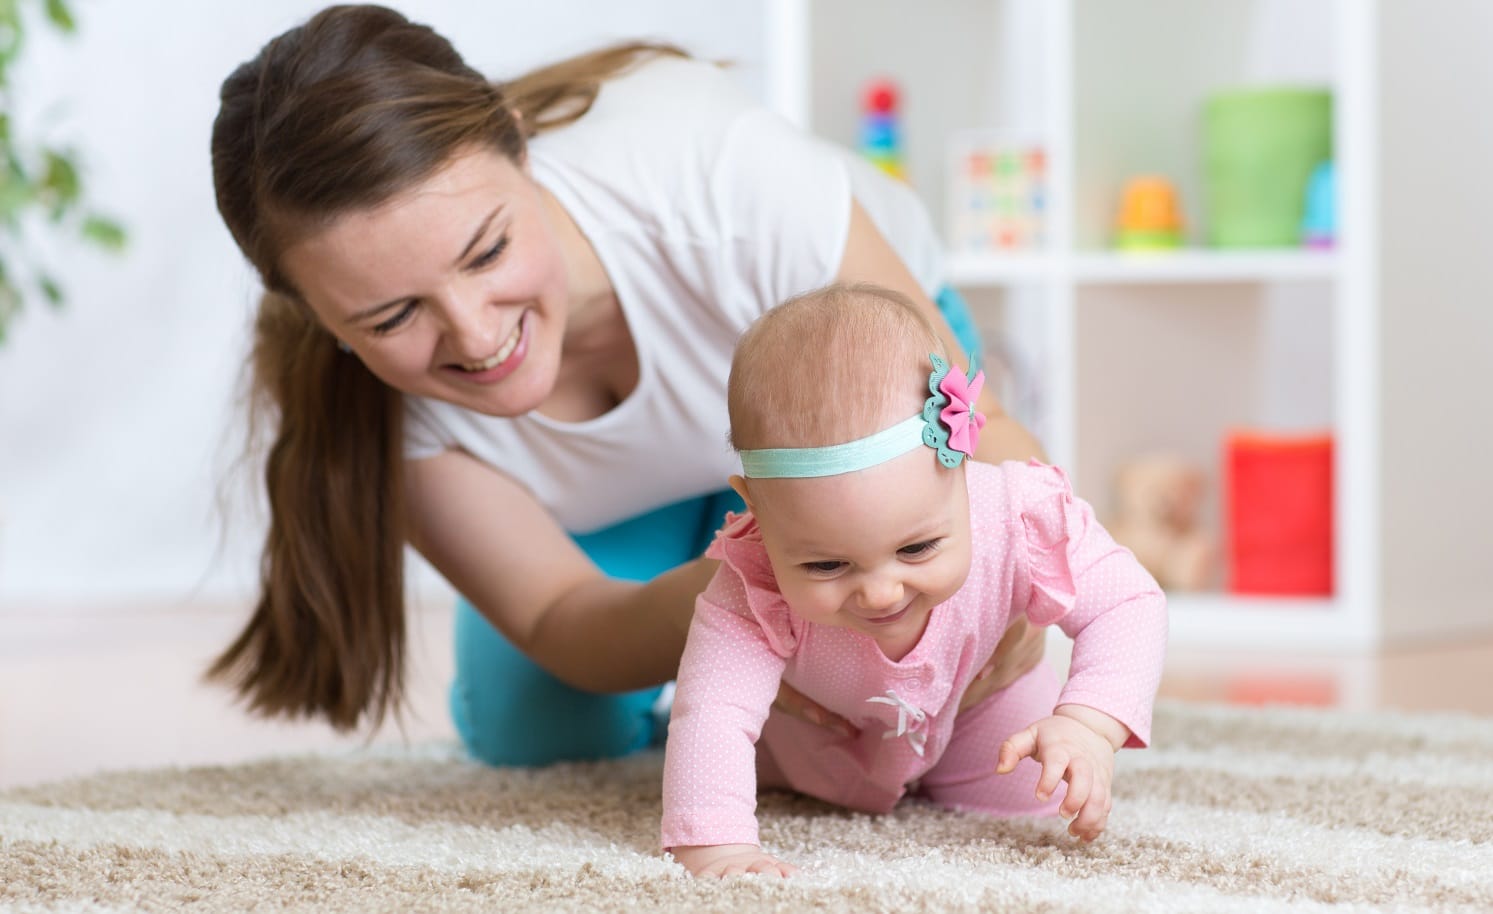 tips to help your baby crawl easily - How to Help Baby Crawl?